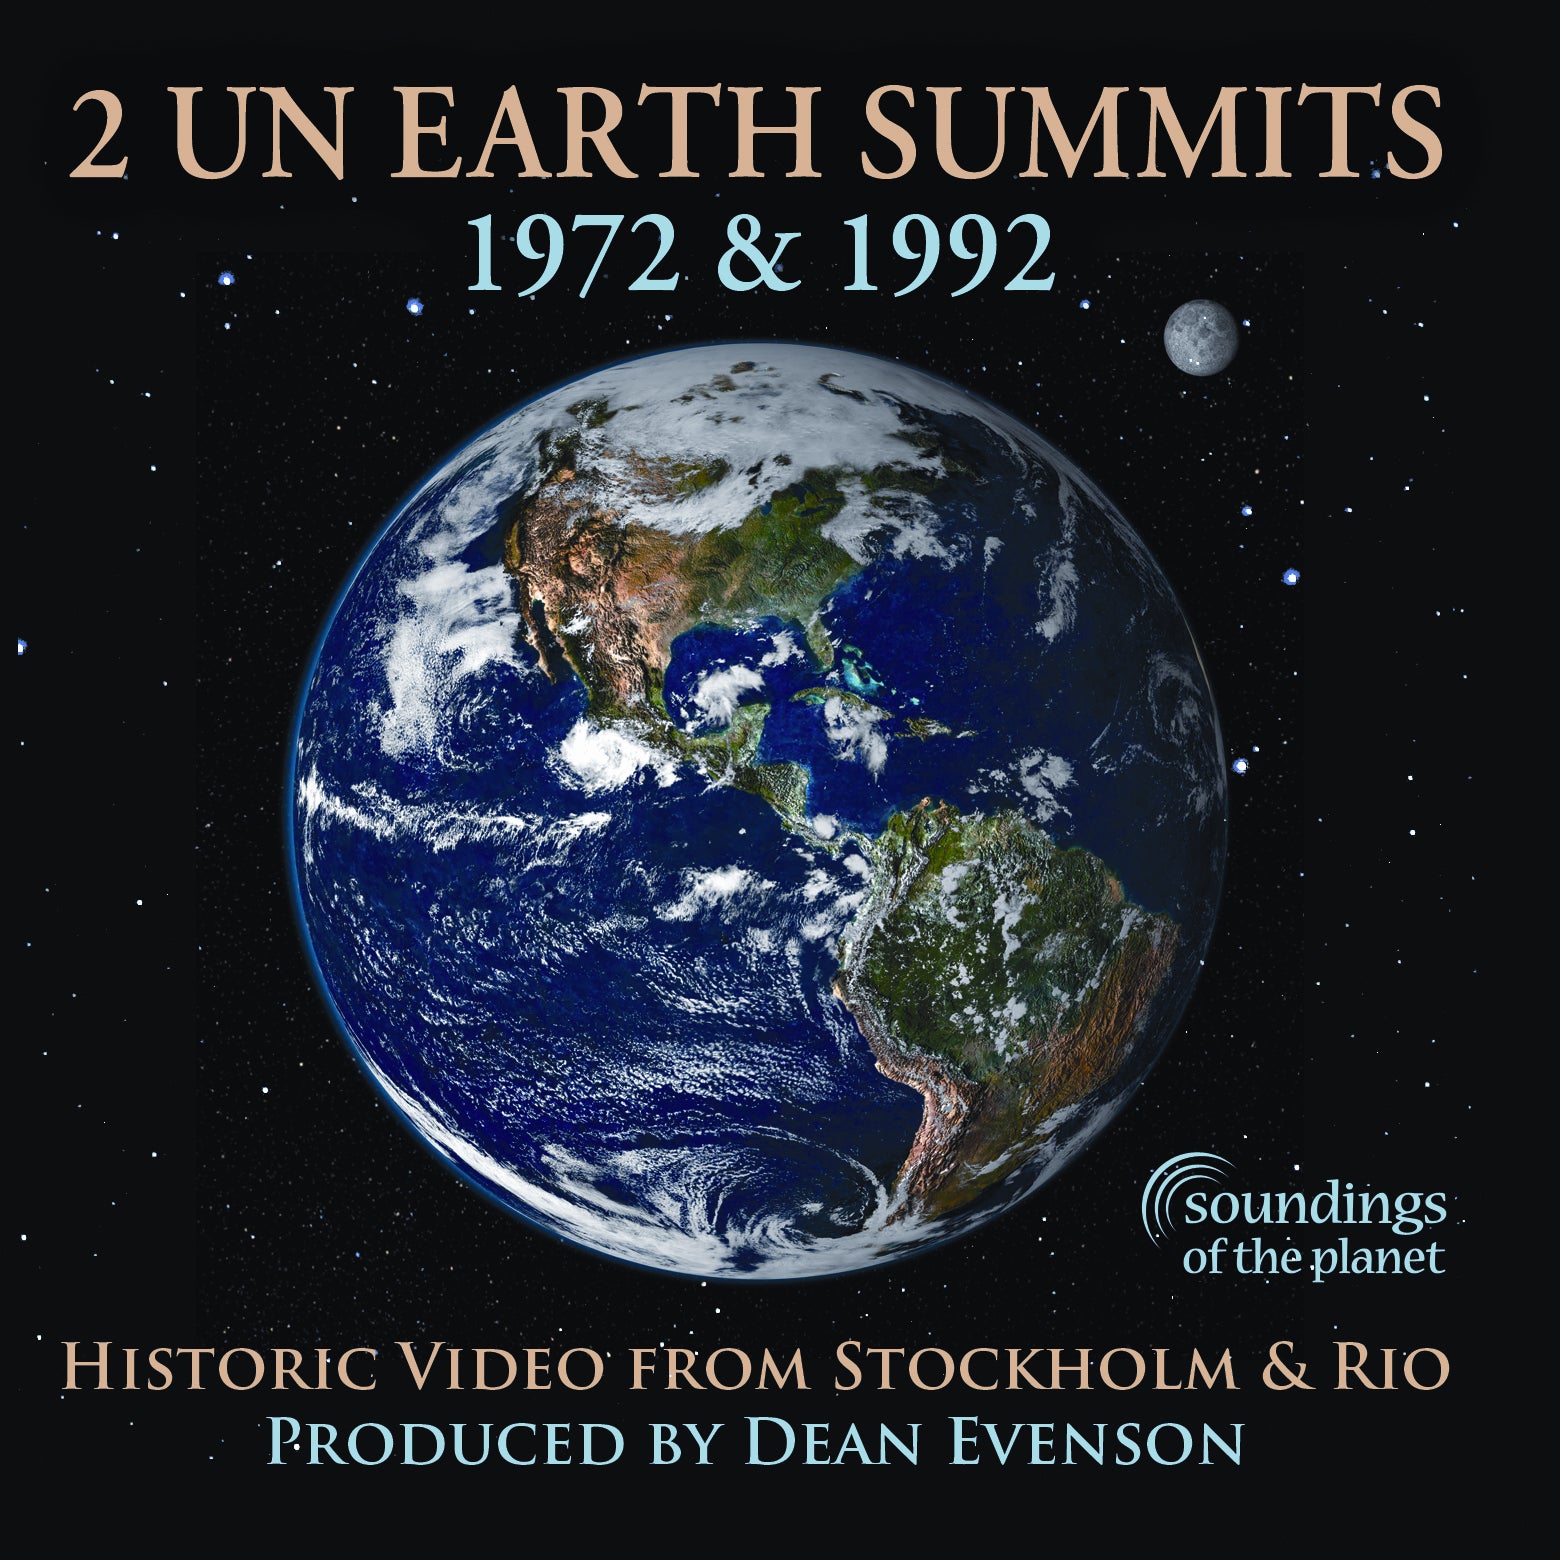 2 U.N. SUMMITS Alt Soundings of the Planet produced by Dean Evenson